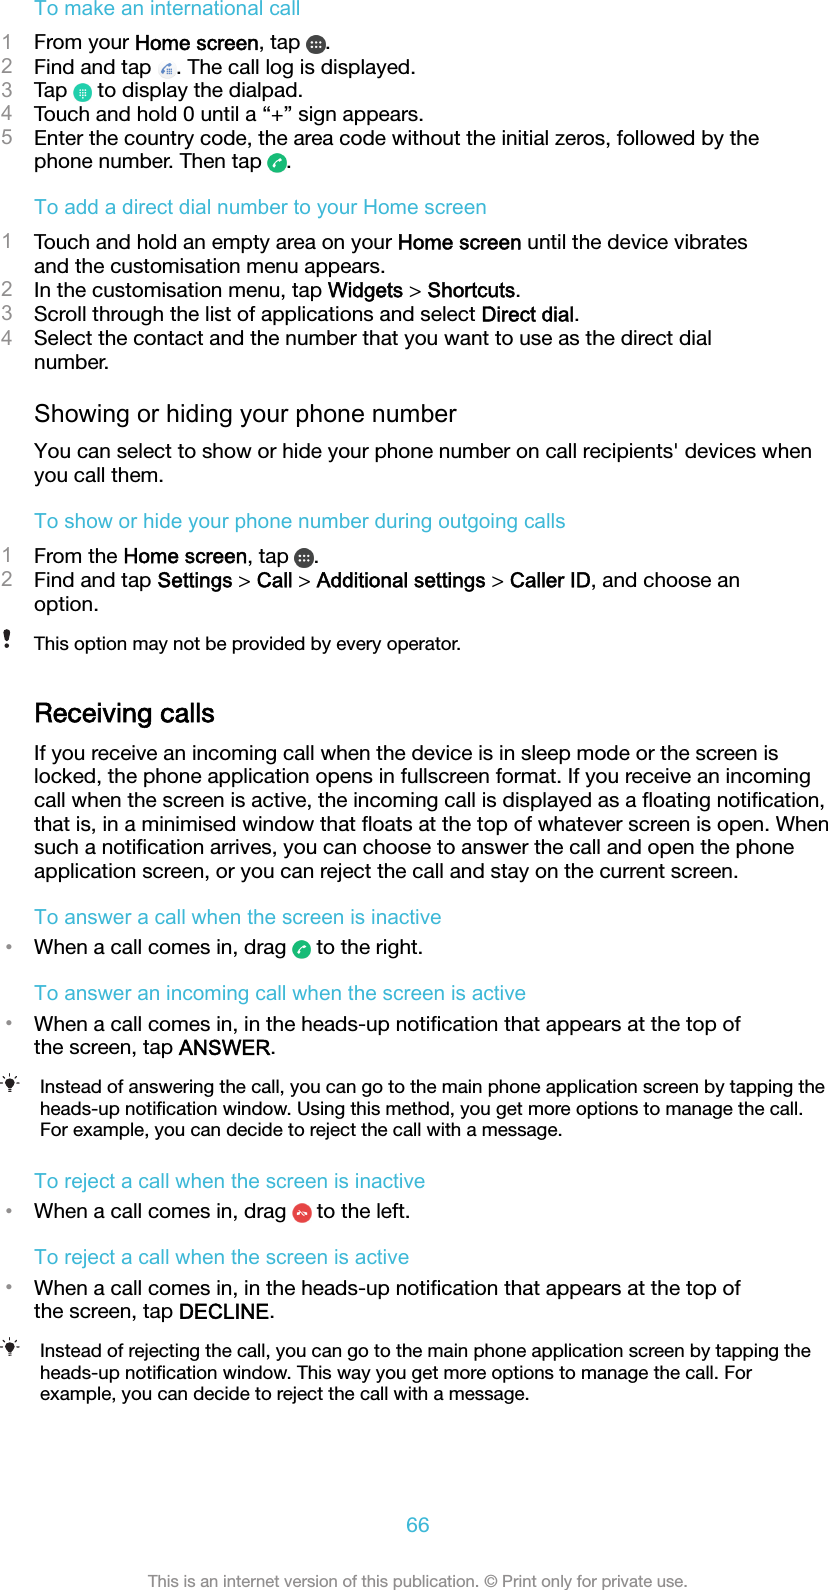 To make an international call1From your Home screen, tap  .2Find and tap  . The call log is displayed.3Tap   to display the dialpad.4Touch and hold 0 until a “+” sign appears.5Enter the country code, the area code without the initial zeros, followed by thephone number. Then tap  .To add a direct dial number to your Home screen1Touch and hold an empty area on your Home screen until the device vibratesand the customisation menu appears.2In the customisation menu, tap Widgets &gt; Shortcuts.3Scroll through the list of applications and select Direct dial.4Select the contact and the number that you want to use as the direct dialnumber.Showing or hiding your phone numberYou can select to show or hide your phone number on call recipients&apos; devices whenyou call them.To show or hide your phone number during outgoing calls1From the Home screen, tap  .2Find and tap Settings &gt; Call &gt; Additional settings &gt; Caller ID, and choose anoption.This option may not be provided by every operator.Receiving callsIf you receive an incoming call when the device is in sleep mode or the screen islocked, the phone application opens in fullscreen format. If you receive an incomingcall when the screen is active, the incoming call is displayed as a ﬂoating notiﬁcation,that is, in a minimised window that ﬂoats at the top of whatever screen is open. Whensuch a notiﬁcation arrives, you can choose to answer the call and open the phoneapplication screen, or you can reject the call and stay on the current screen.To answer a call when the screen is inactive•When a call comes in, drag   to the right.To answer an incoming call when the screen is active•When a call comes in, in the heads-up notiﬁcation that appears at the top ofthe screen, tap ANSWER.Instead of answering the call, you can go to the main phone application screen by tapping theheads-up notiﬁcation window. Using this method, you get more options to manage the call.For example, you can decide to reject the call with a message.To reject a call when the screen is inactive•When a call comes in, drag   to the left.To reject a call when the screen is active•When a call comes in, in the heads-up notiﬁcation that appears at the top ofthe screen, tap DECLINE.Instead of rejecting the call, you can go to the main phone application screen by tapping theheads-up notiﬁcation window. This way you get more options to manage the call. Forexample, you can decide to reject the call with a message.66This is an internet version of this publication. © Print only for private use.